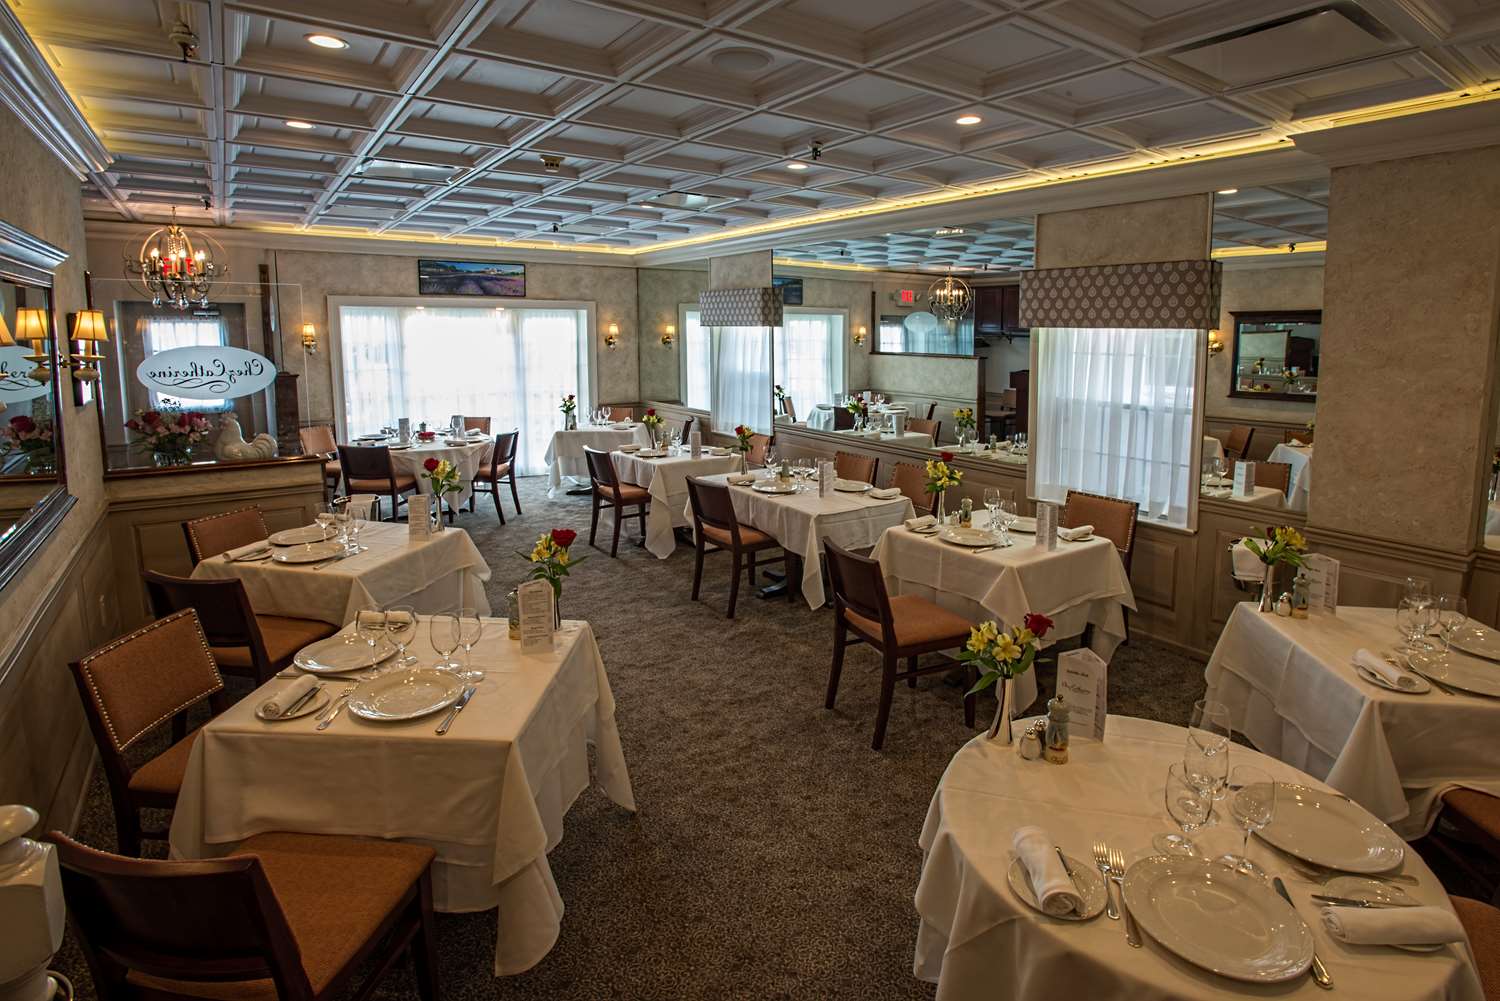 If you're seeking the pinnacle of luxurious accommodations in Westfield, New Jersey, look no further than the Westfield Inn. As one of the best and most luxurious hotels in Westfield, this charming establishment offers an unparalleled experience of comfort, style, and of course, delectable dining.